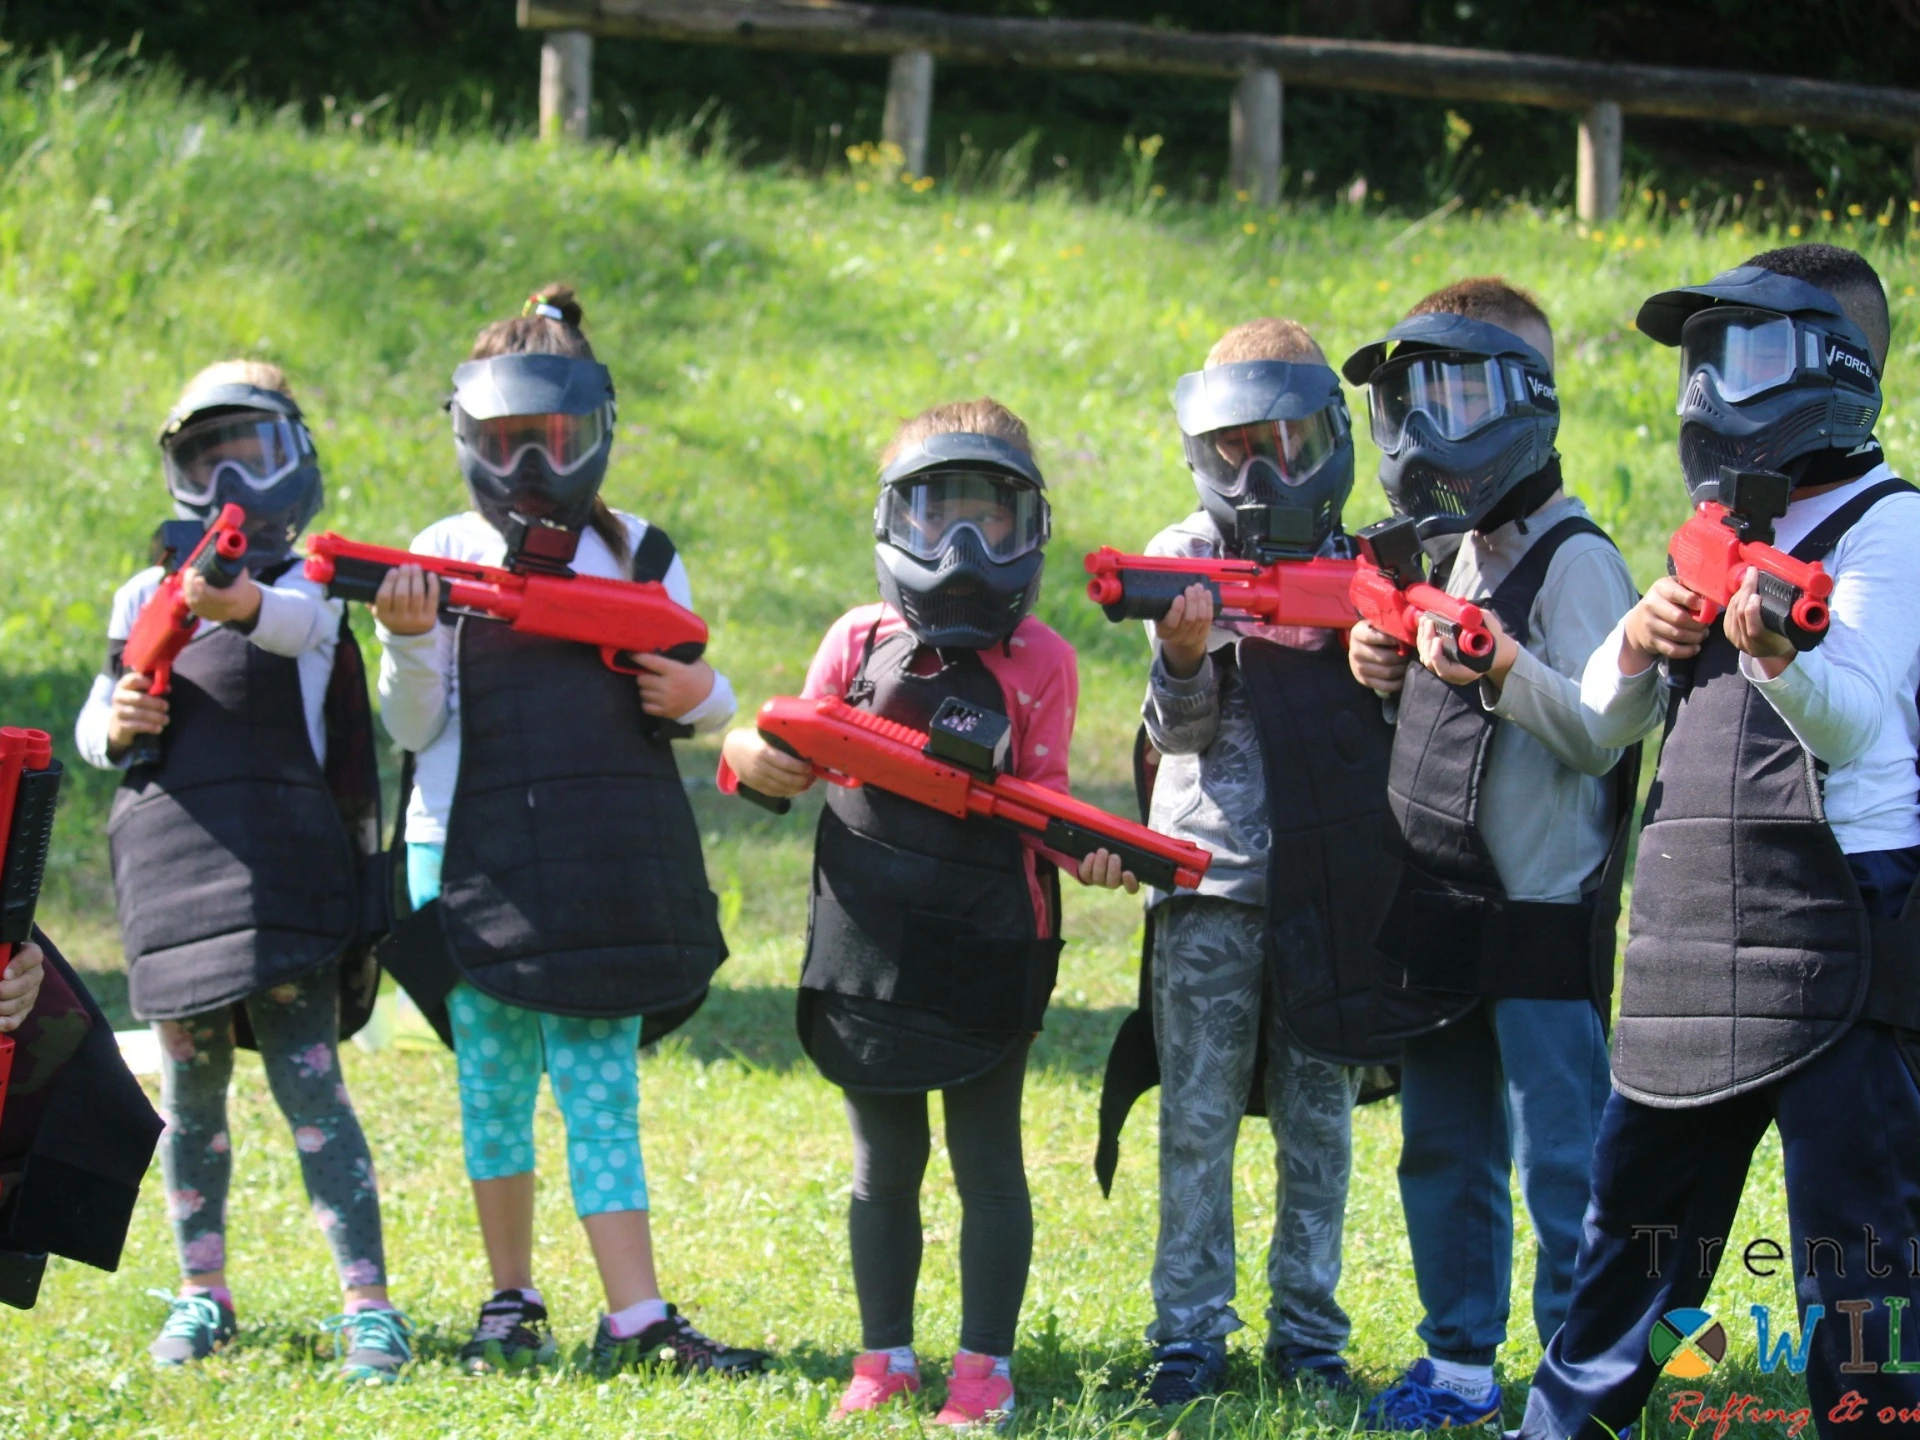 Paintball for Groups